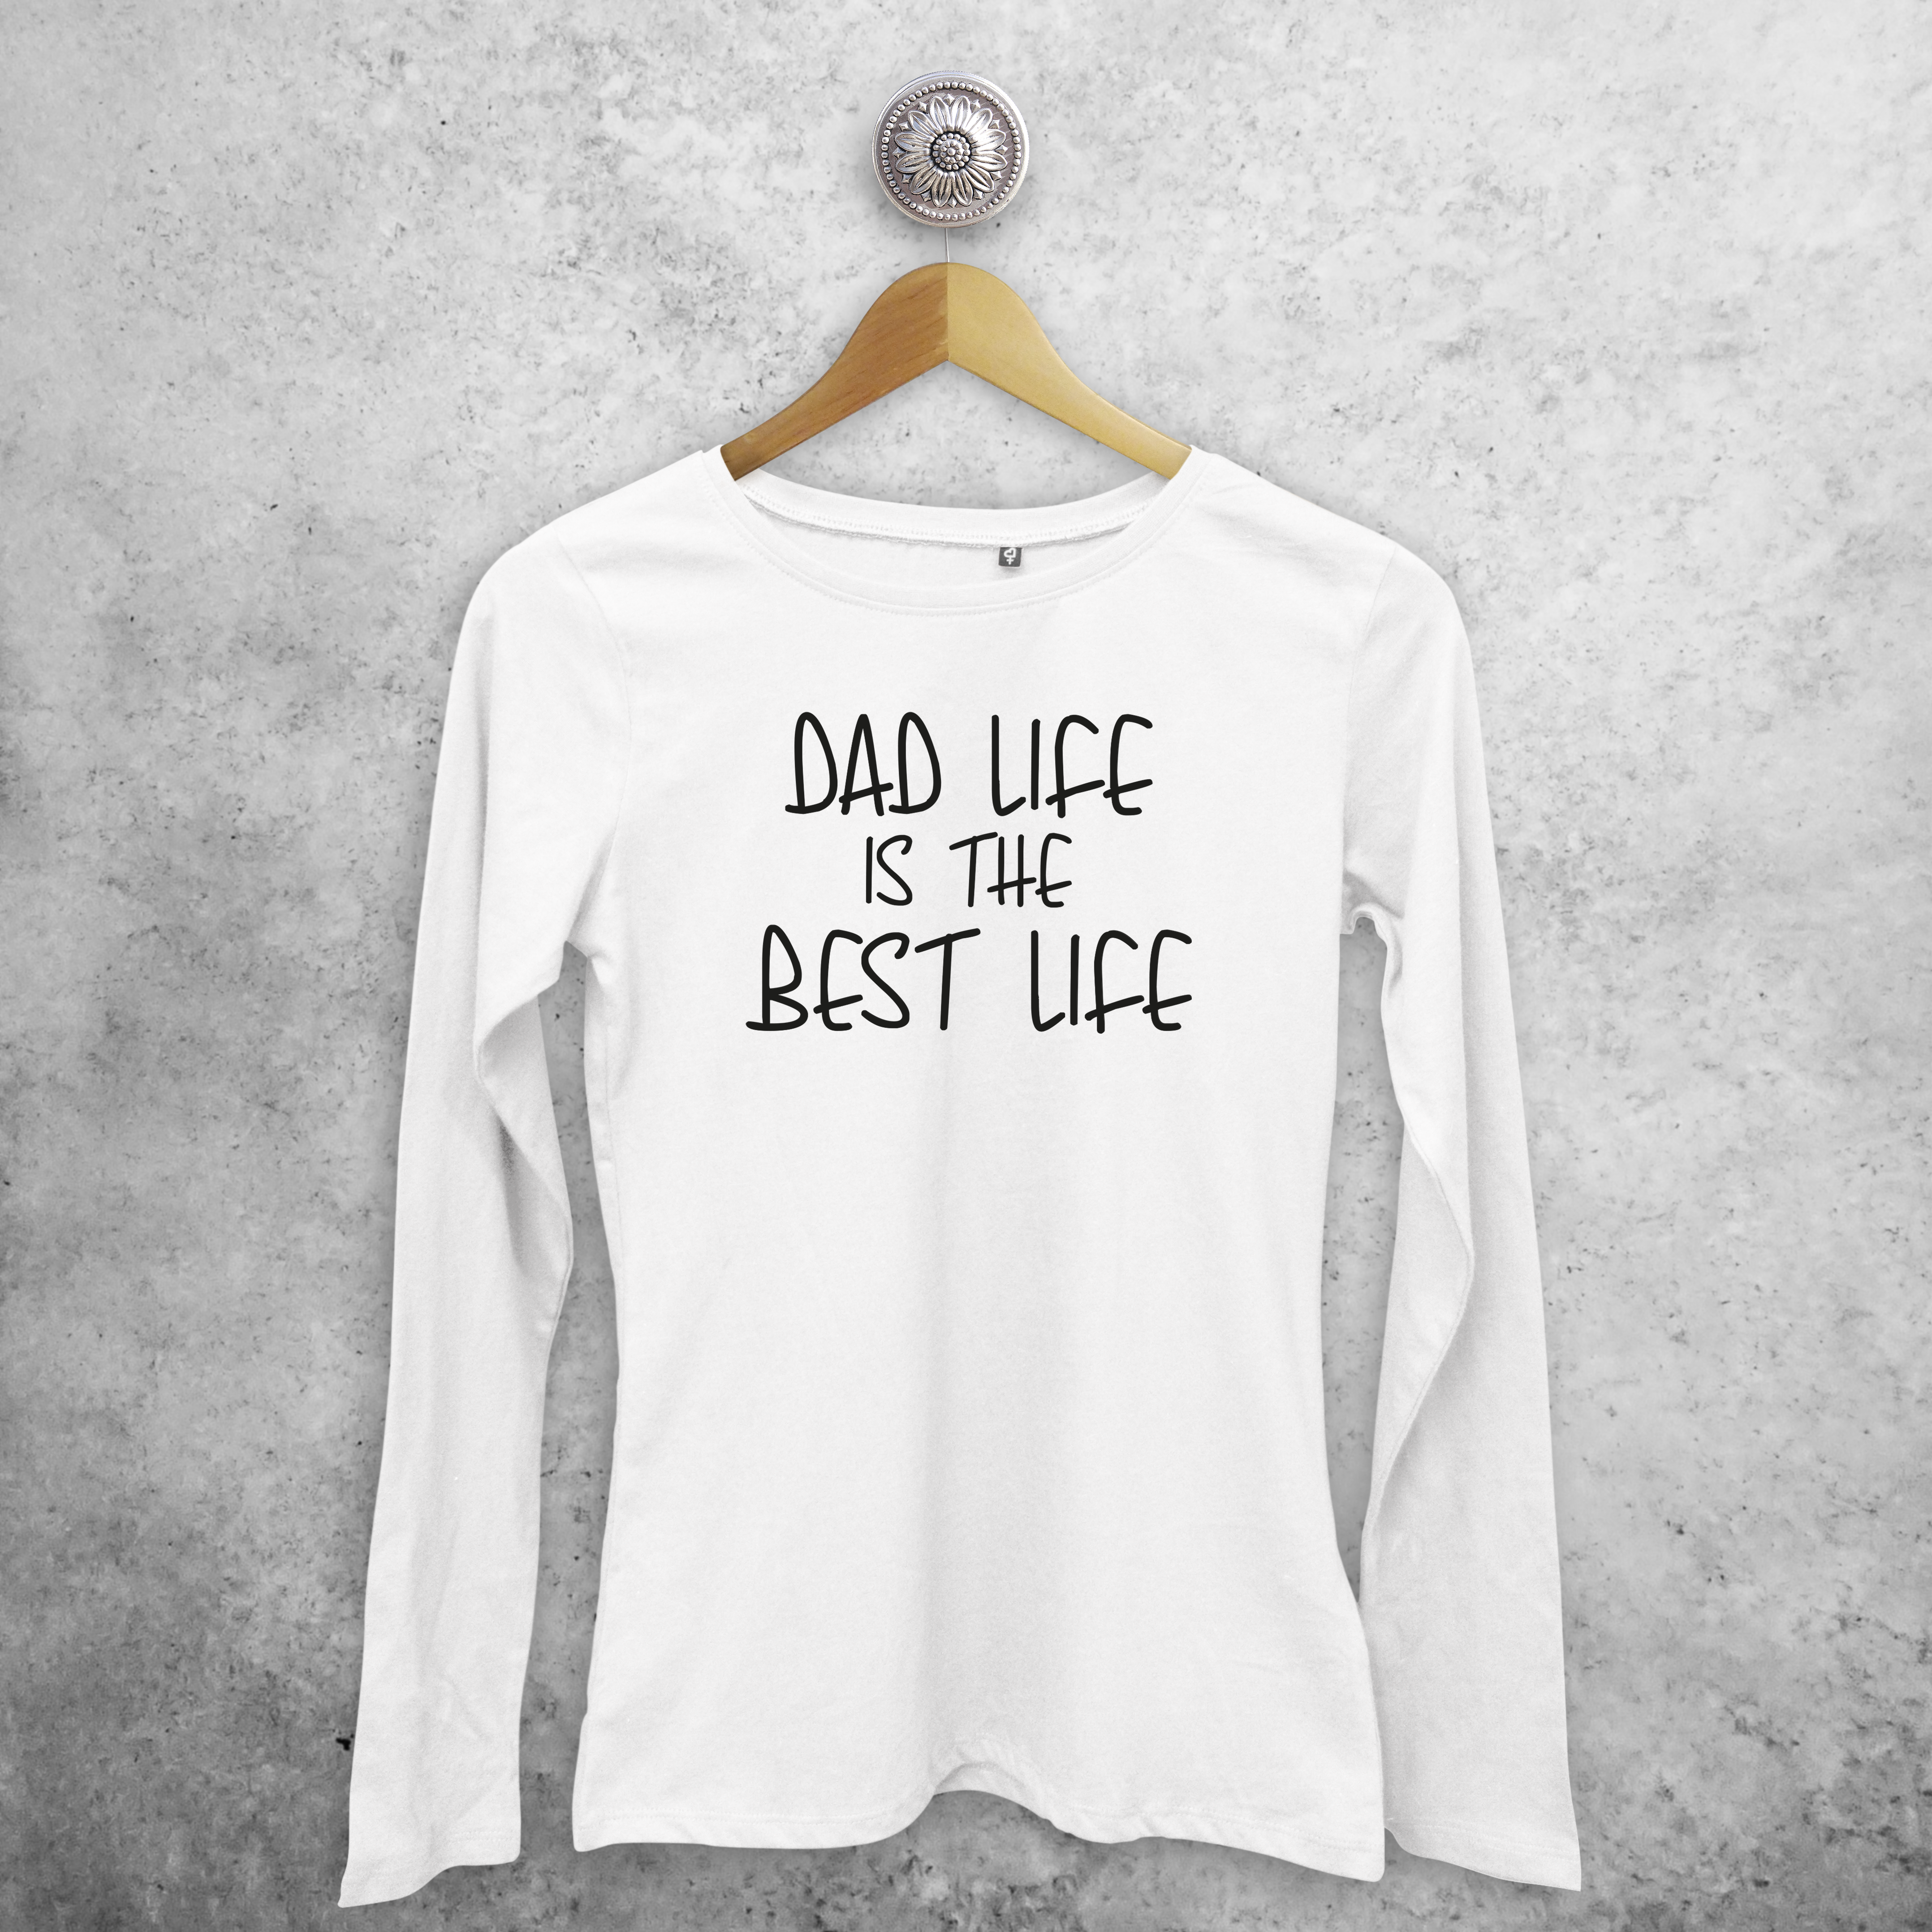 'Dad life is the best life' adult longsleeve shirt